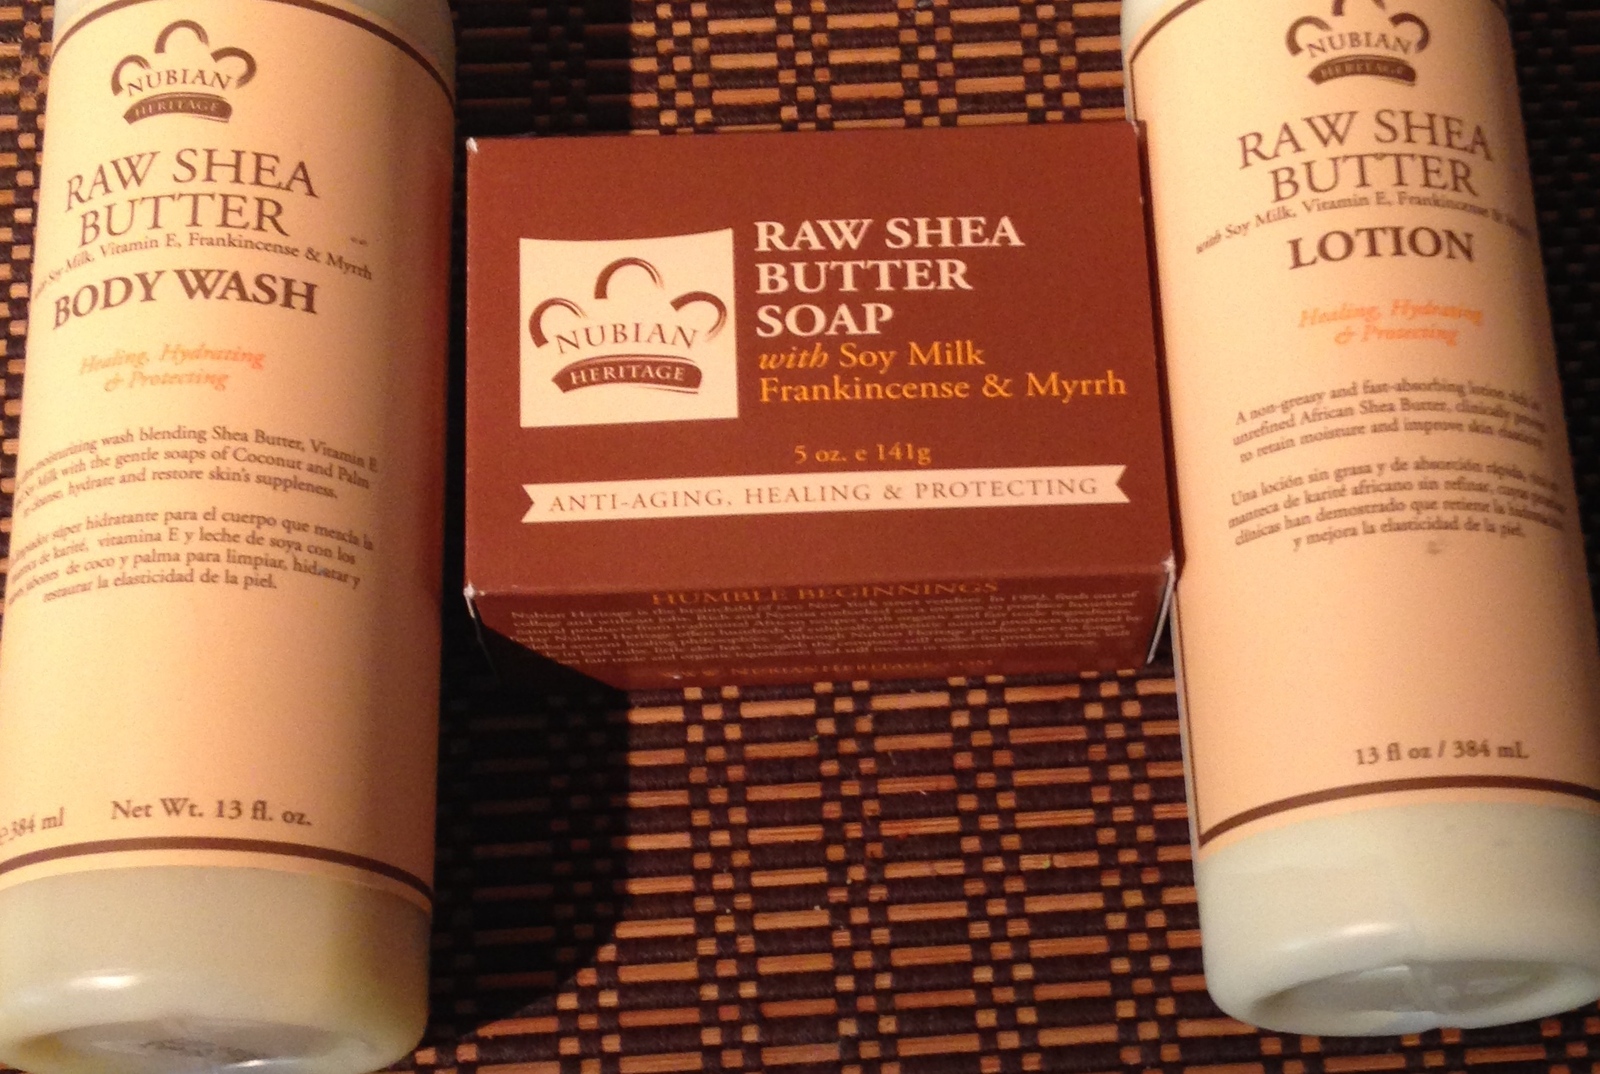 Nubian Heritage Raw Shea Butter with Soy Frankincense and Myrrh Set  - $25.00